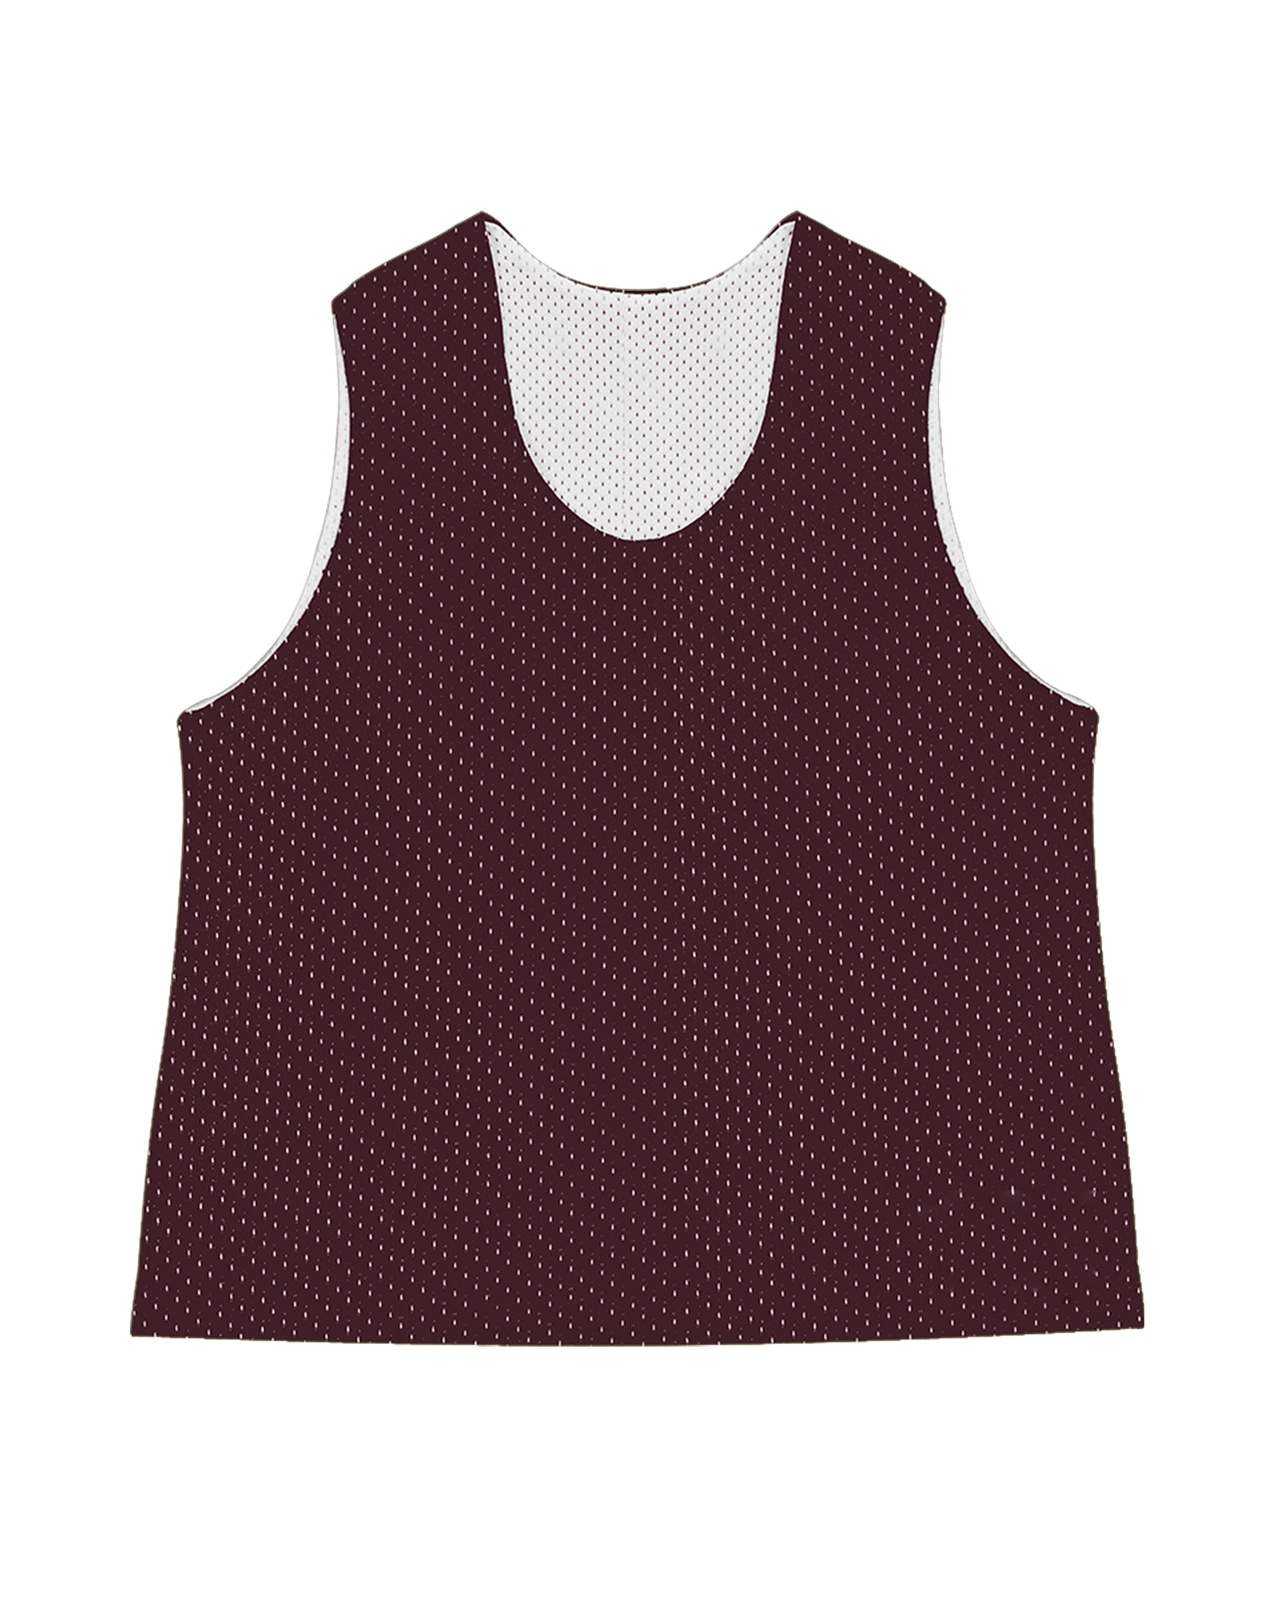 C2 Sport 5260 Mesh Reversible Youth Pinnie - Maroon White - HIT a Double - 1